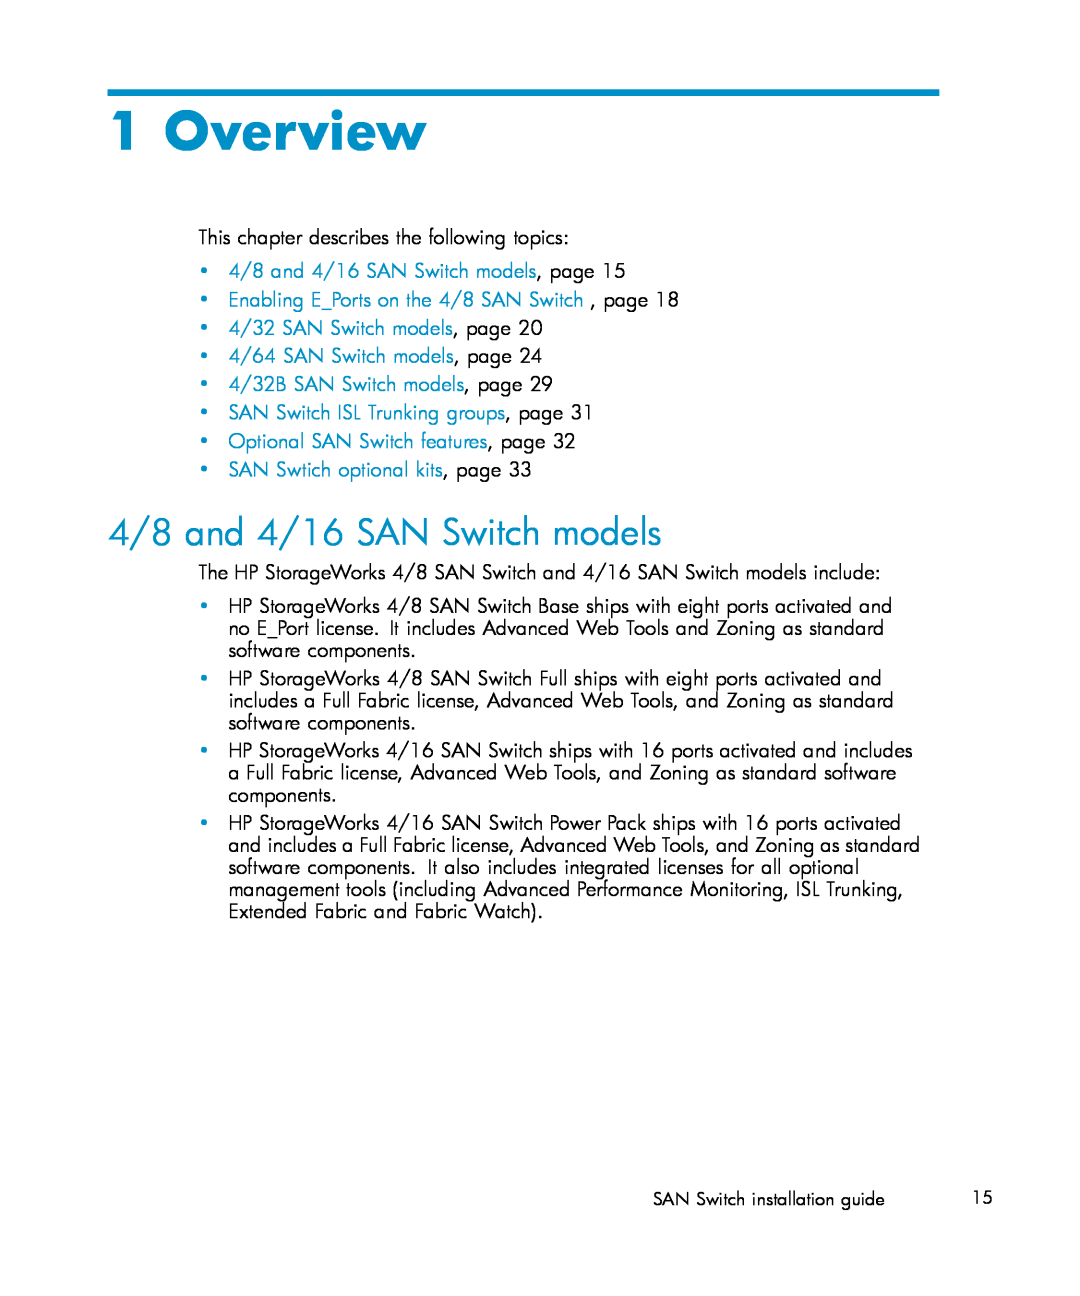 IBM AA-RWF3A-TE manual Overview, 4/8 and 4/16 SAN Switch models, page, Enabling EPorts on the 4/8 SAN Switch , page 